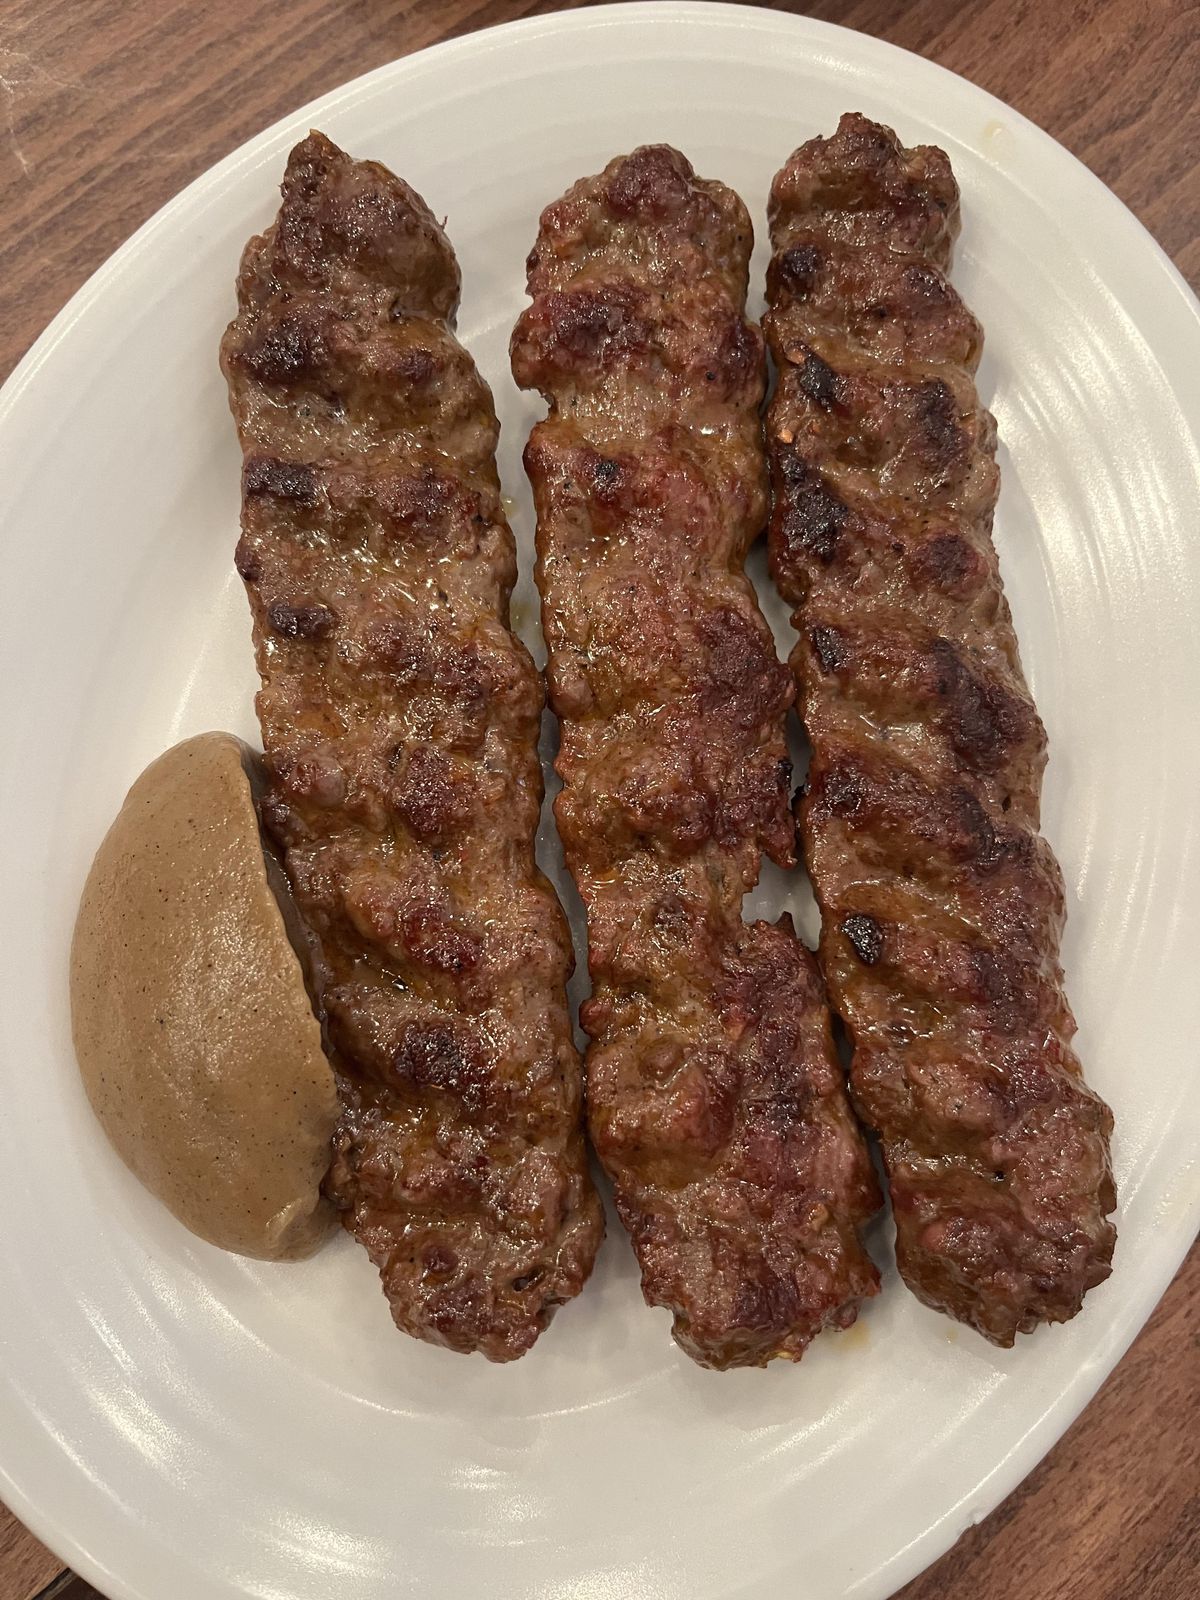 A dollop of grilled apple sauce next to three brown grilled kofte on a white plate, on top of a wooden table